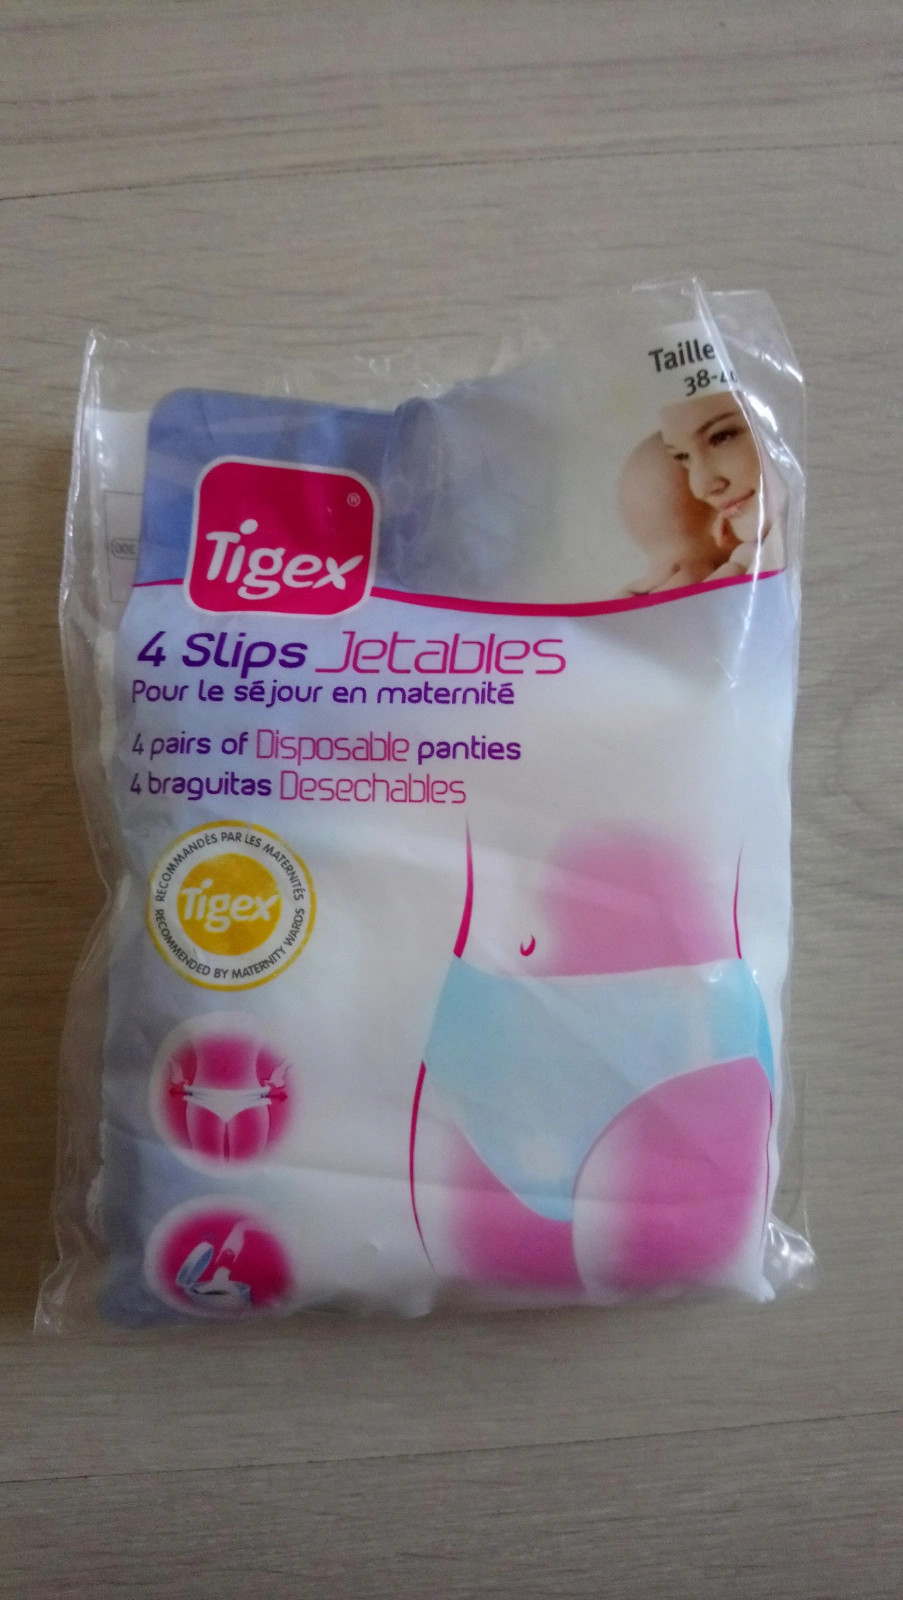 Slips jetables maternité - Tigex | Beebs